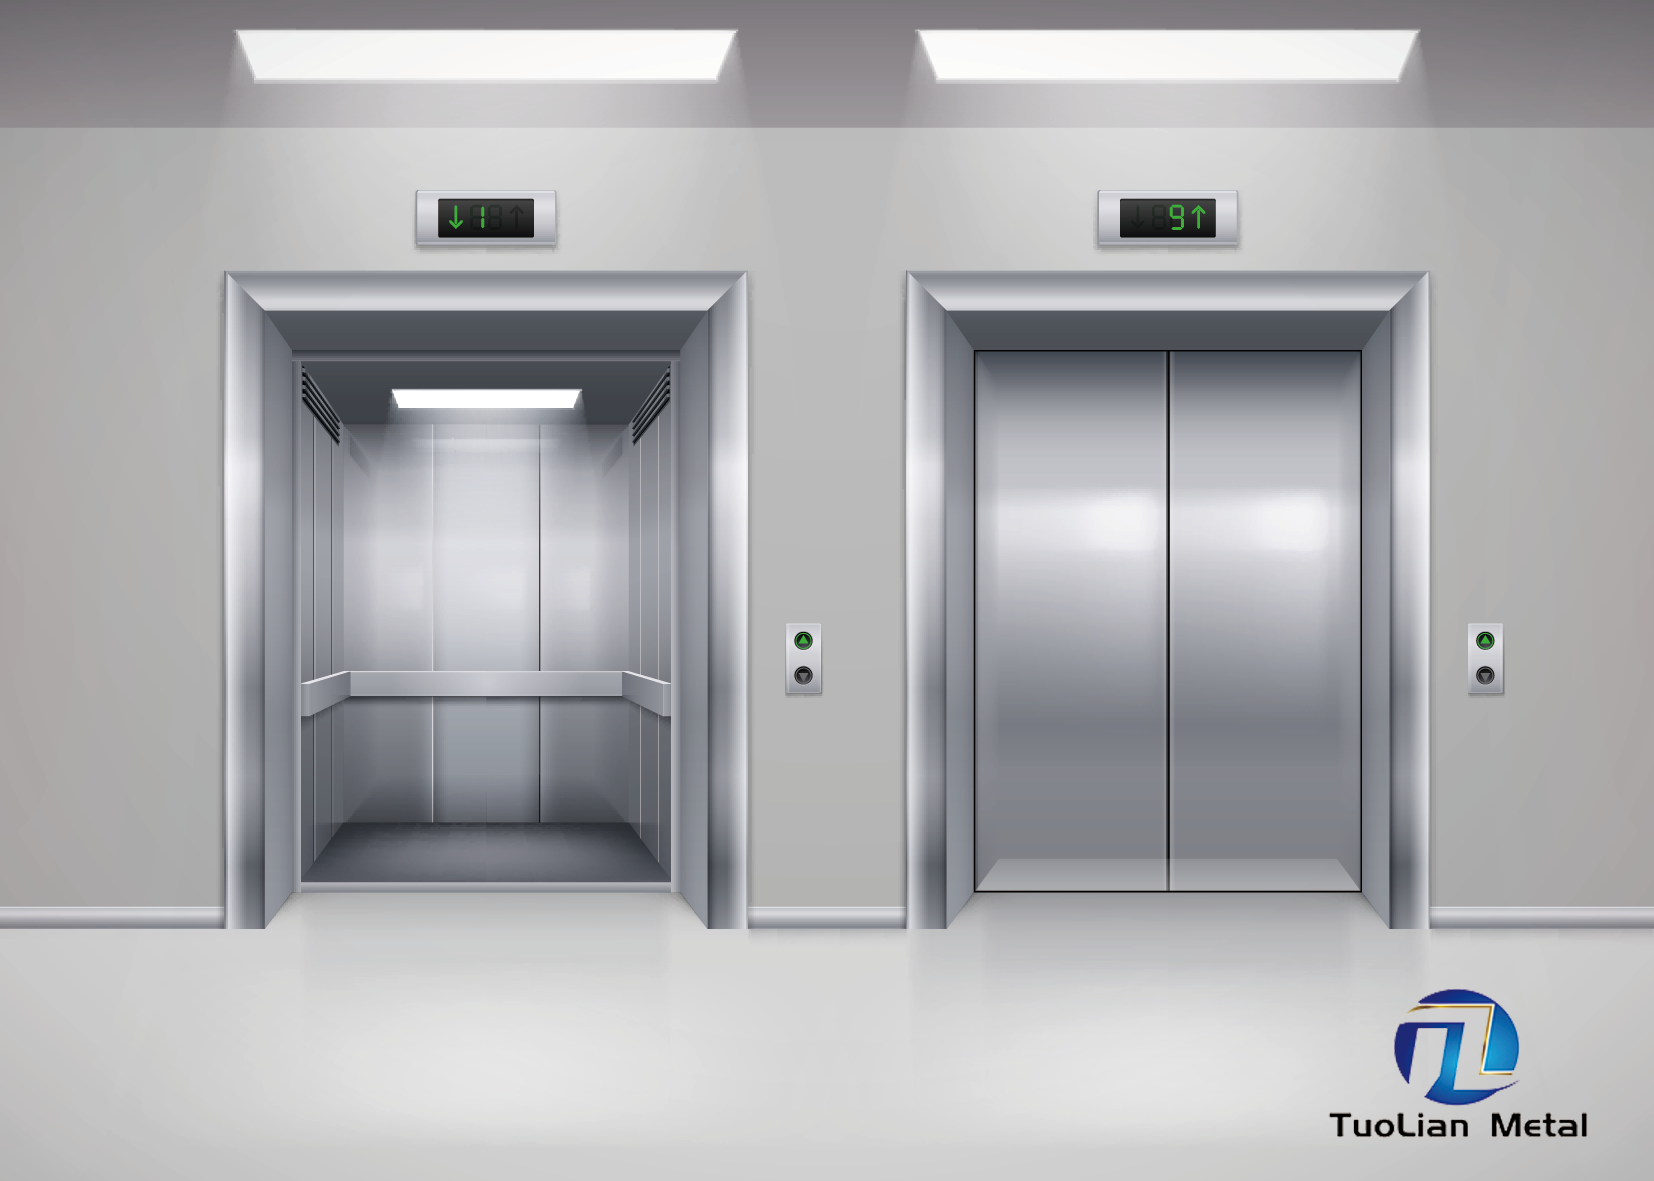 Tuolian Metal Starts to Supply Stainless Steel Material for Elevator Brands